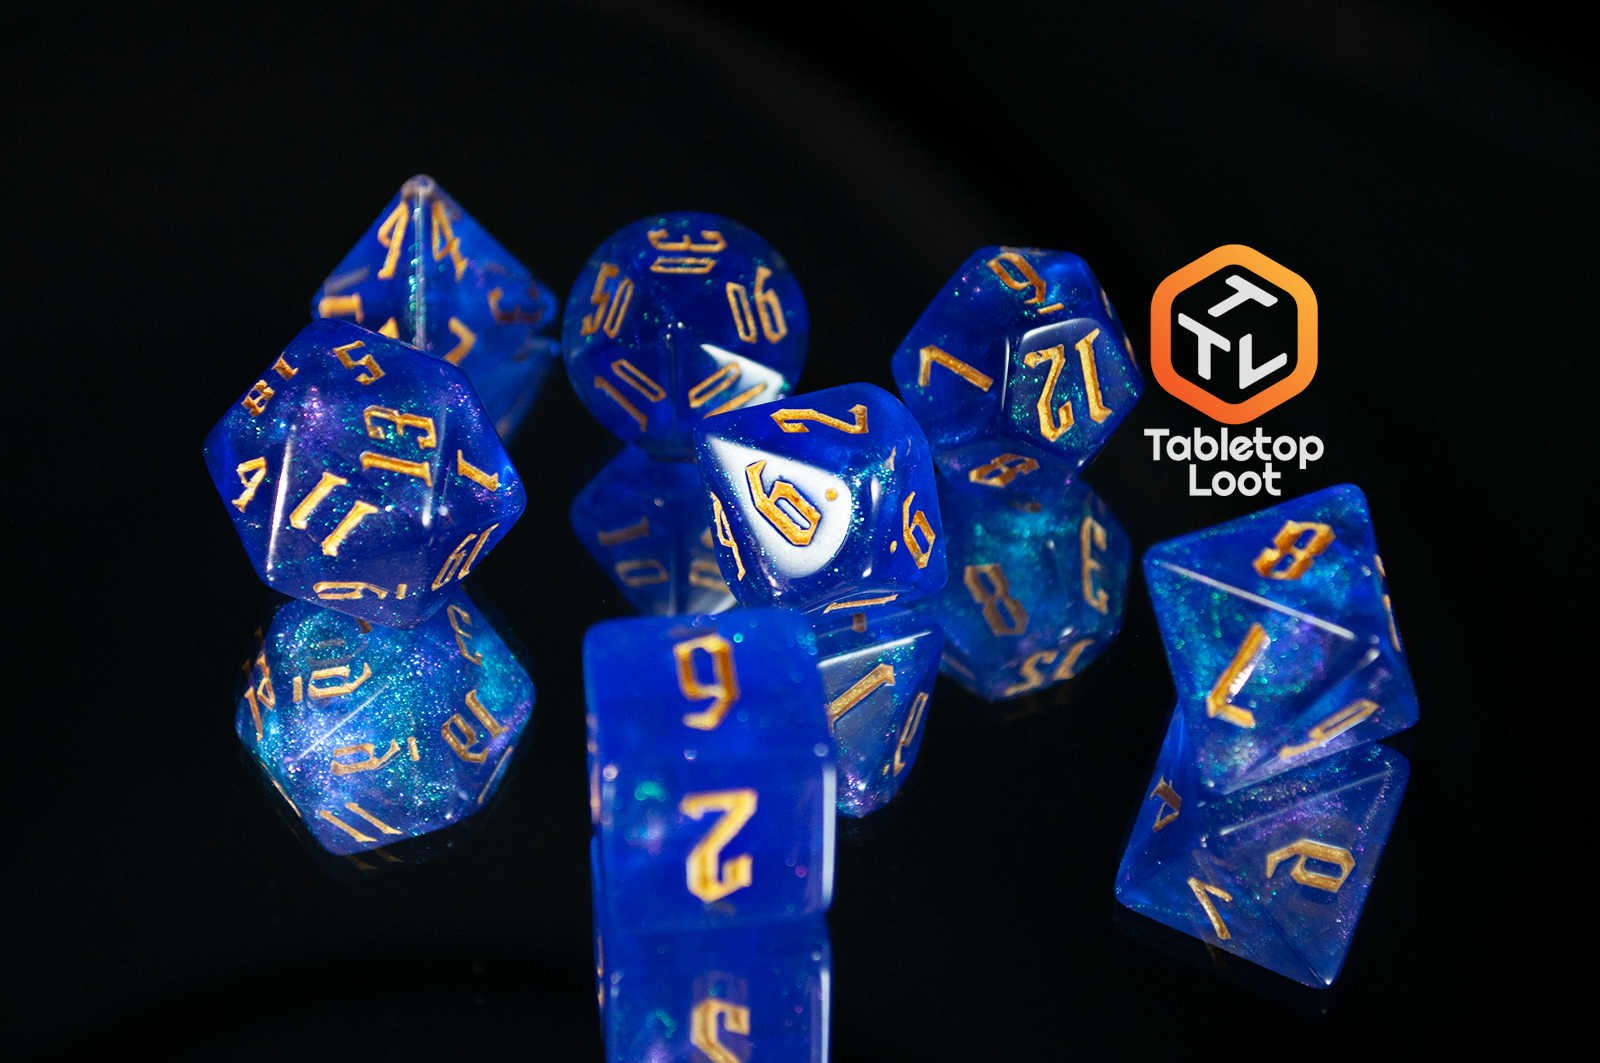 The Wizard's Script 7 piece dice set from Tabletop Loot with bright blue shimmery resin and gold numbering.